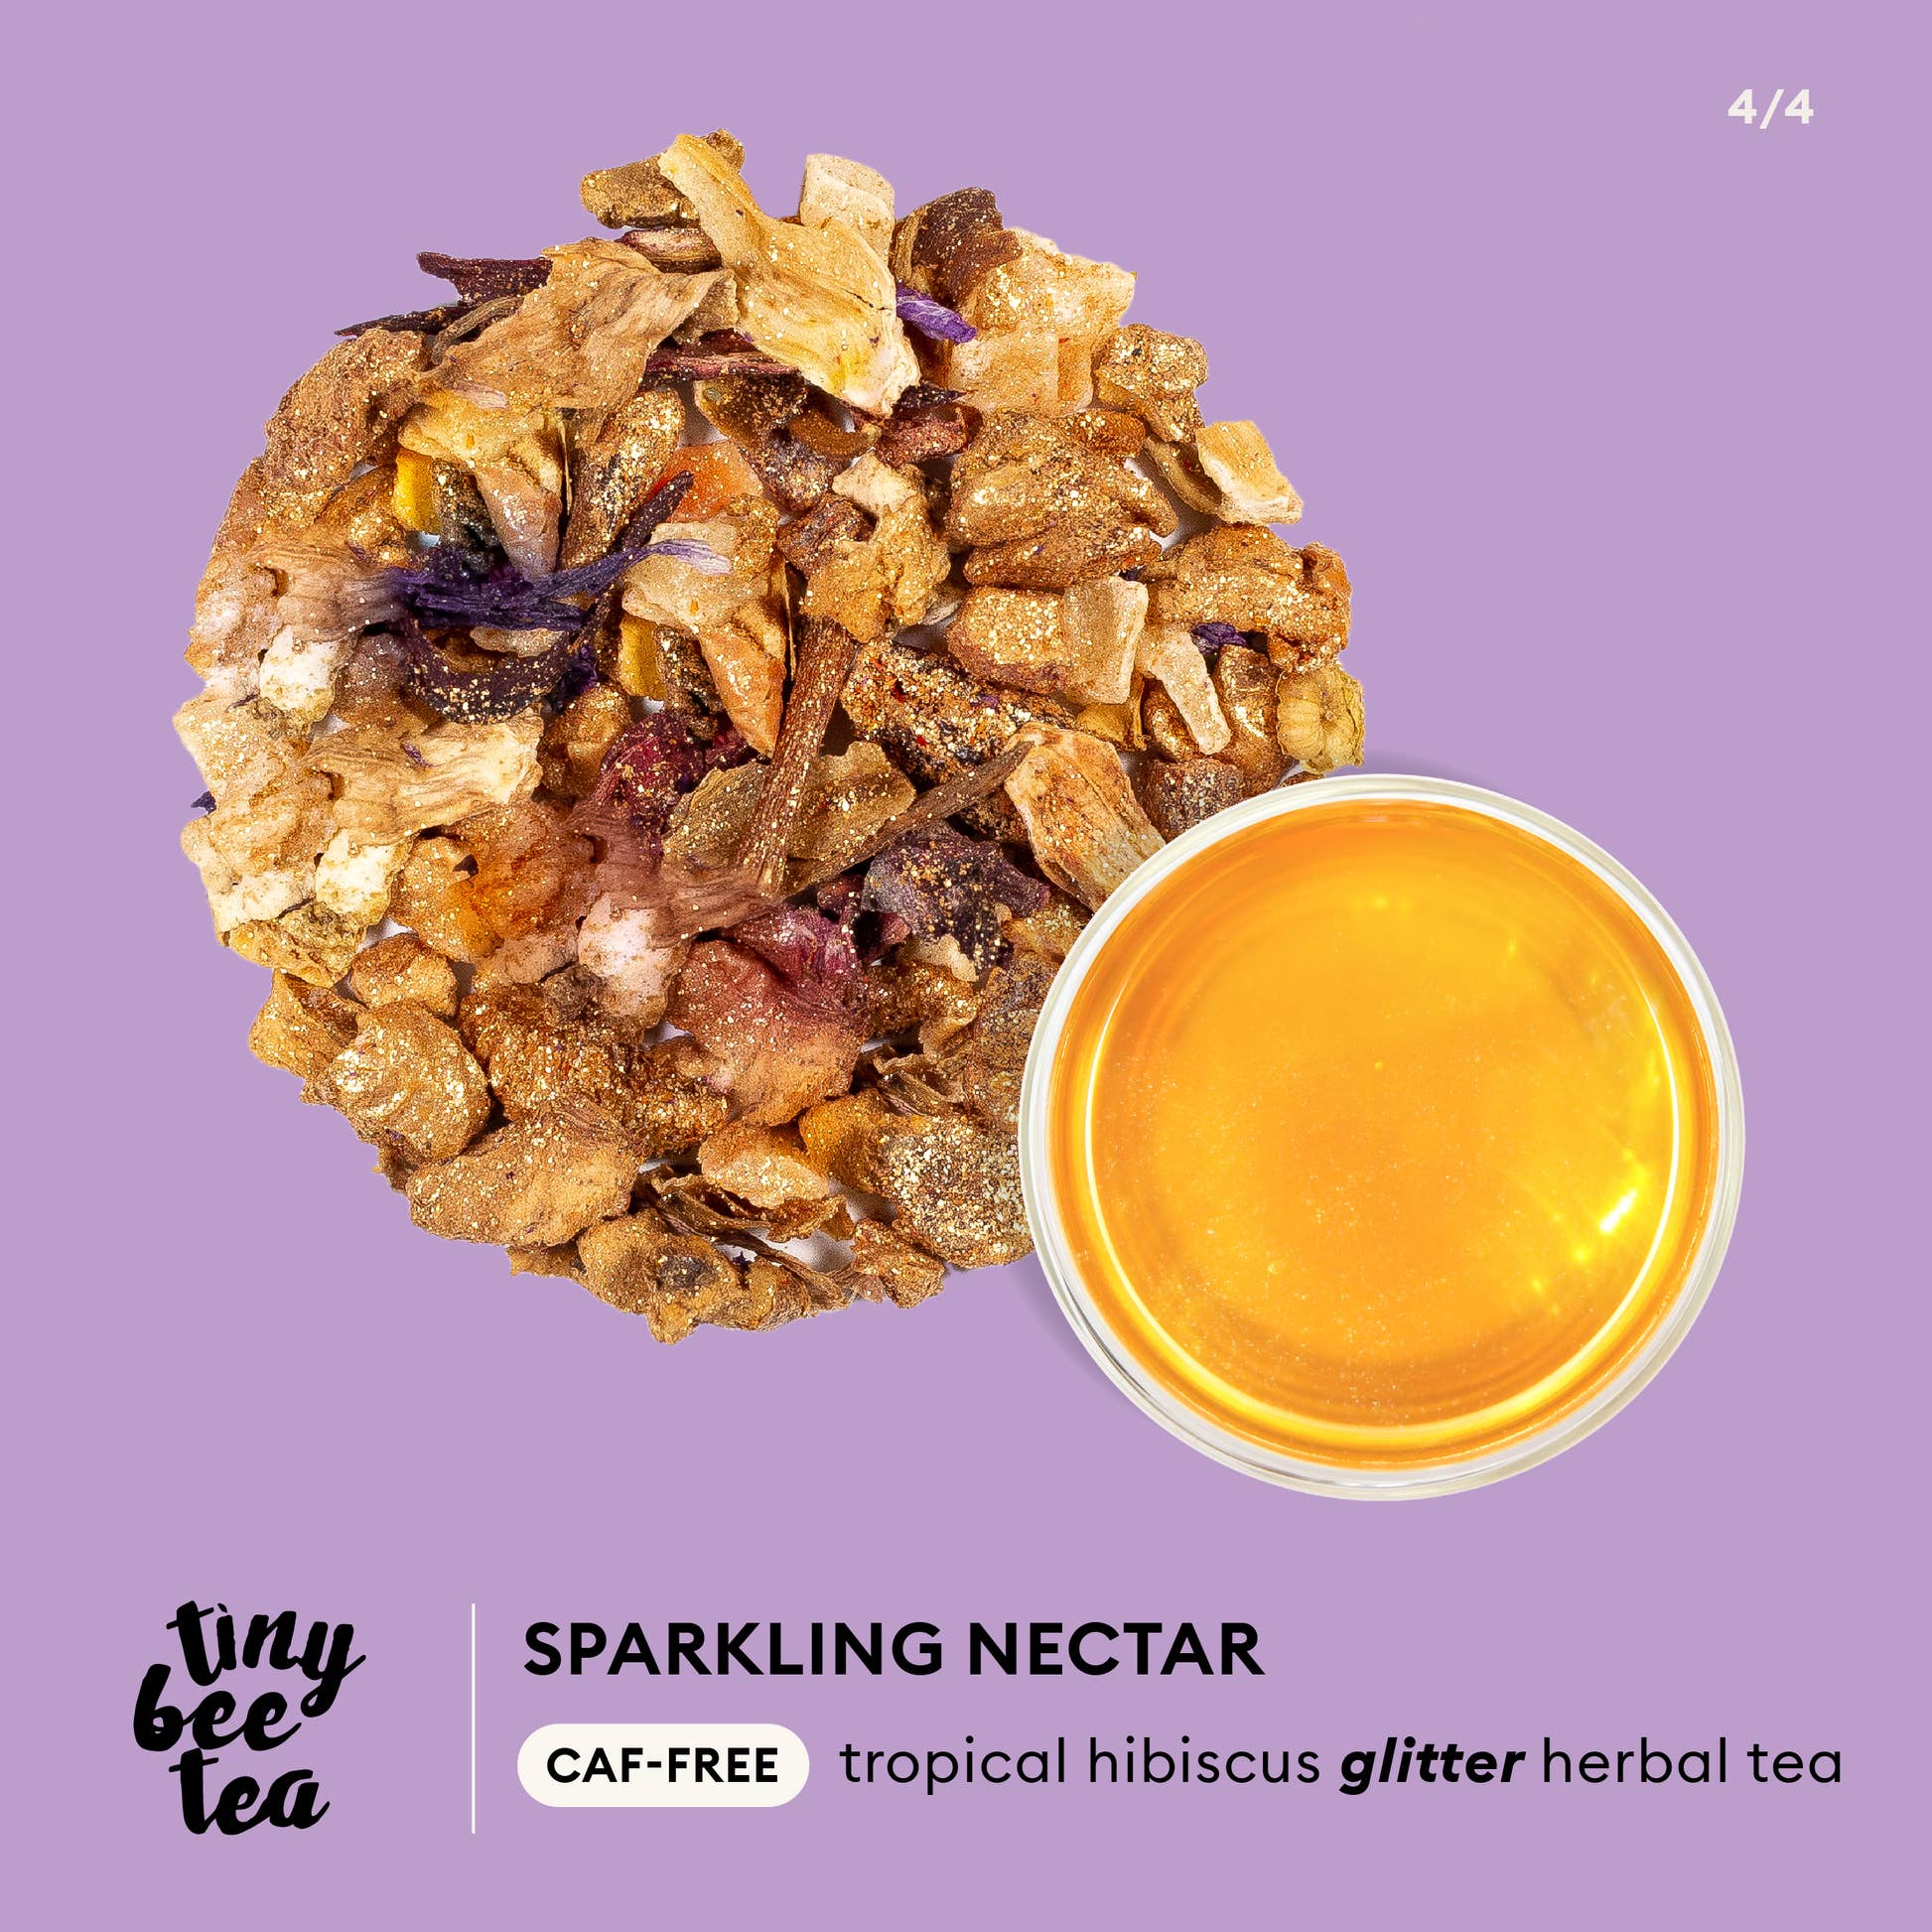 Tiny Bee Tea - Sparkling Nectar caf-free, fruity hibiscus glitter tea infographic